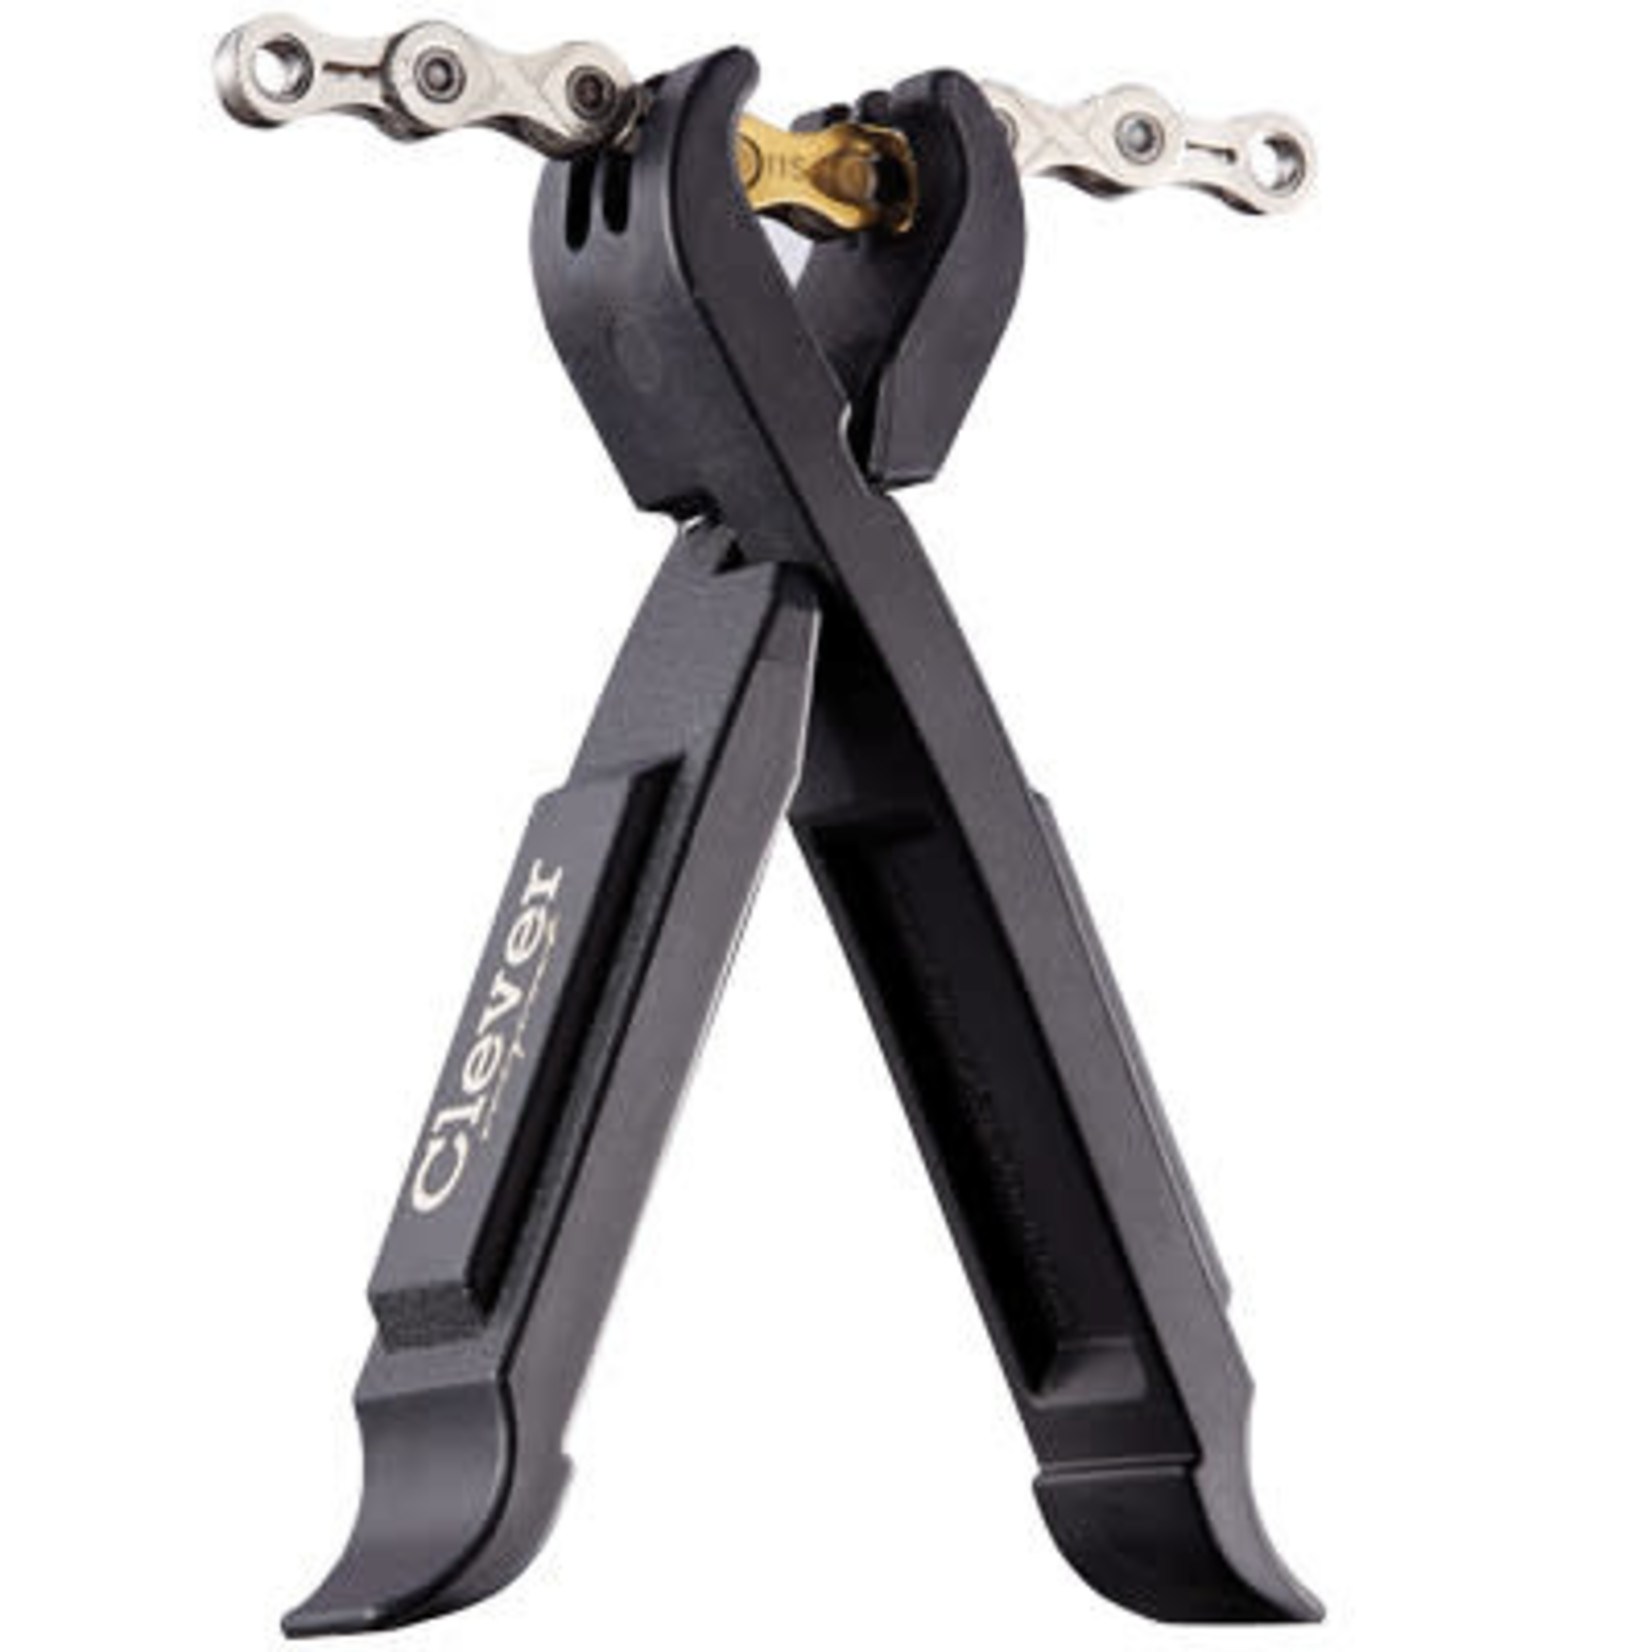 UNITED ENGINEERING CORP. CLEVER,LEVER&CHAIN LINK PLIER BLACK